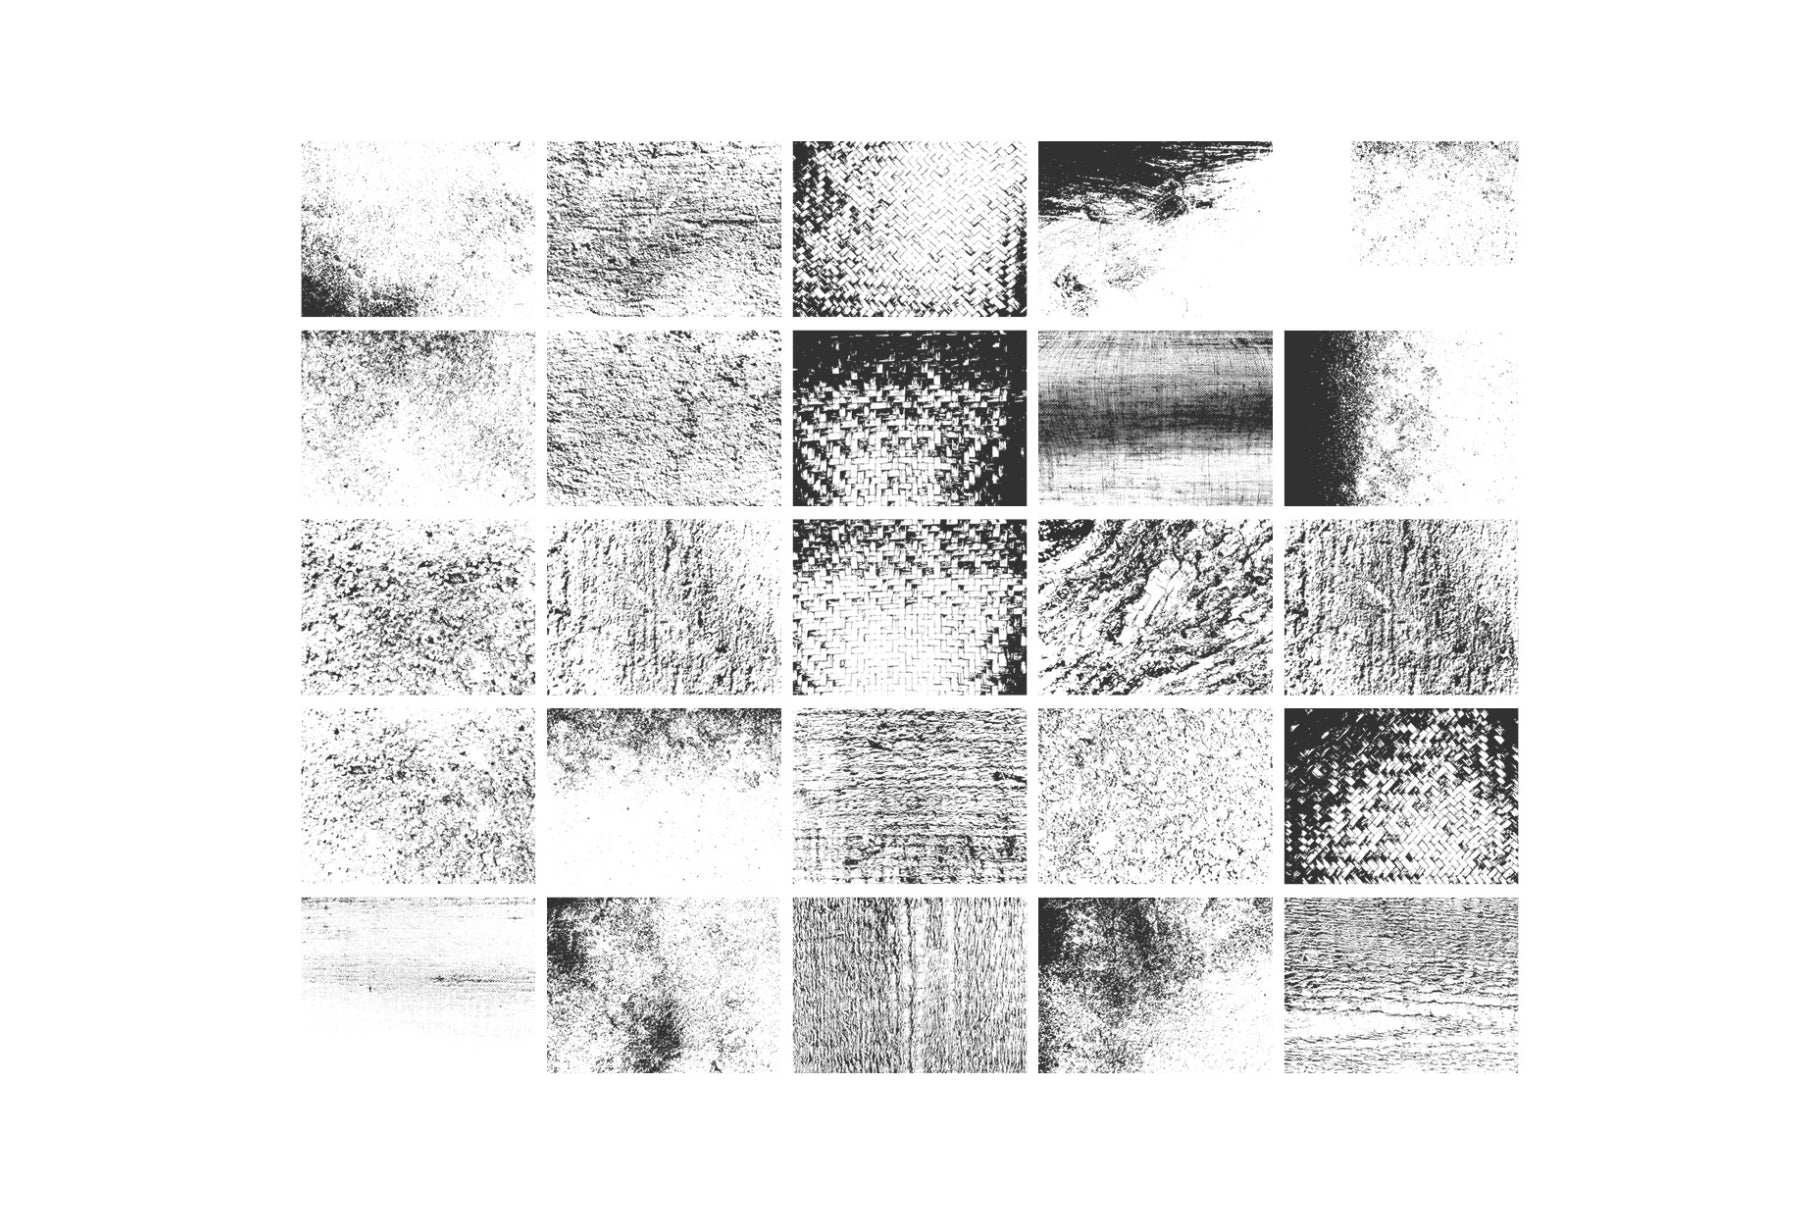 Vector Grunge Texture Backgrounds 03 Grungy Distressed Vector Illustrations